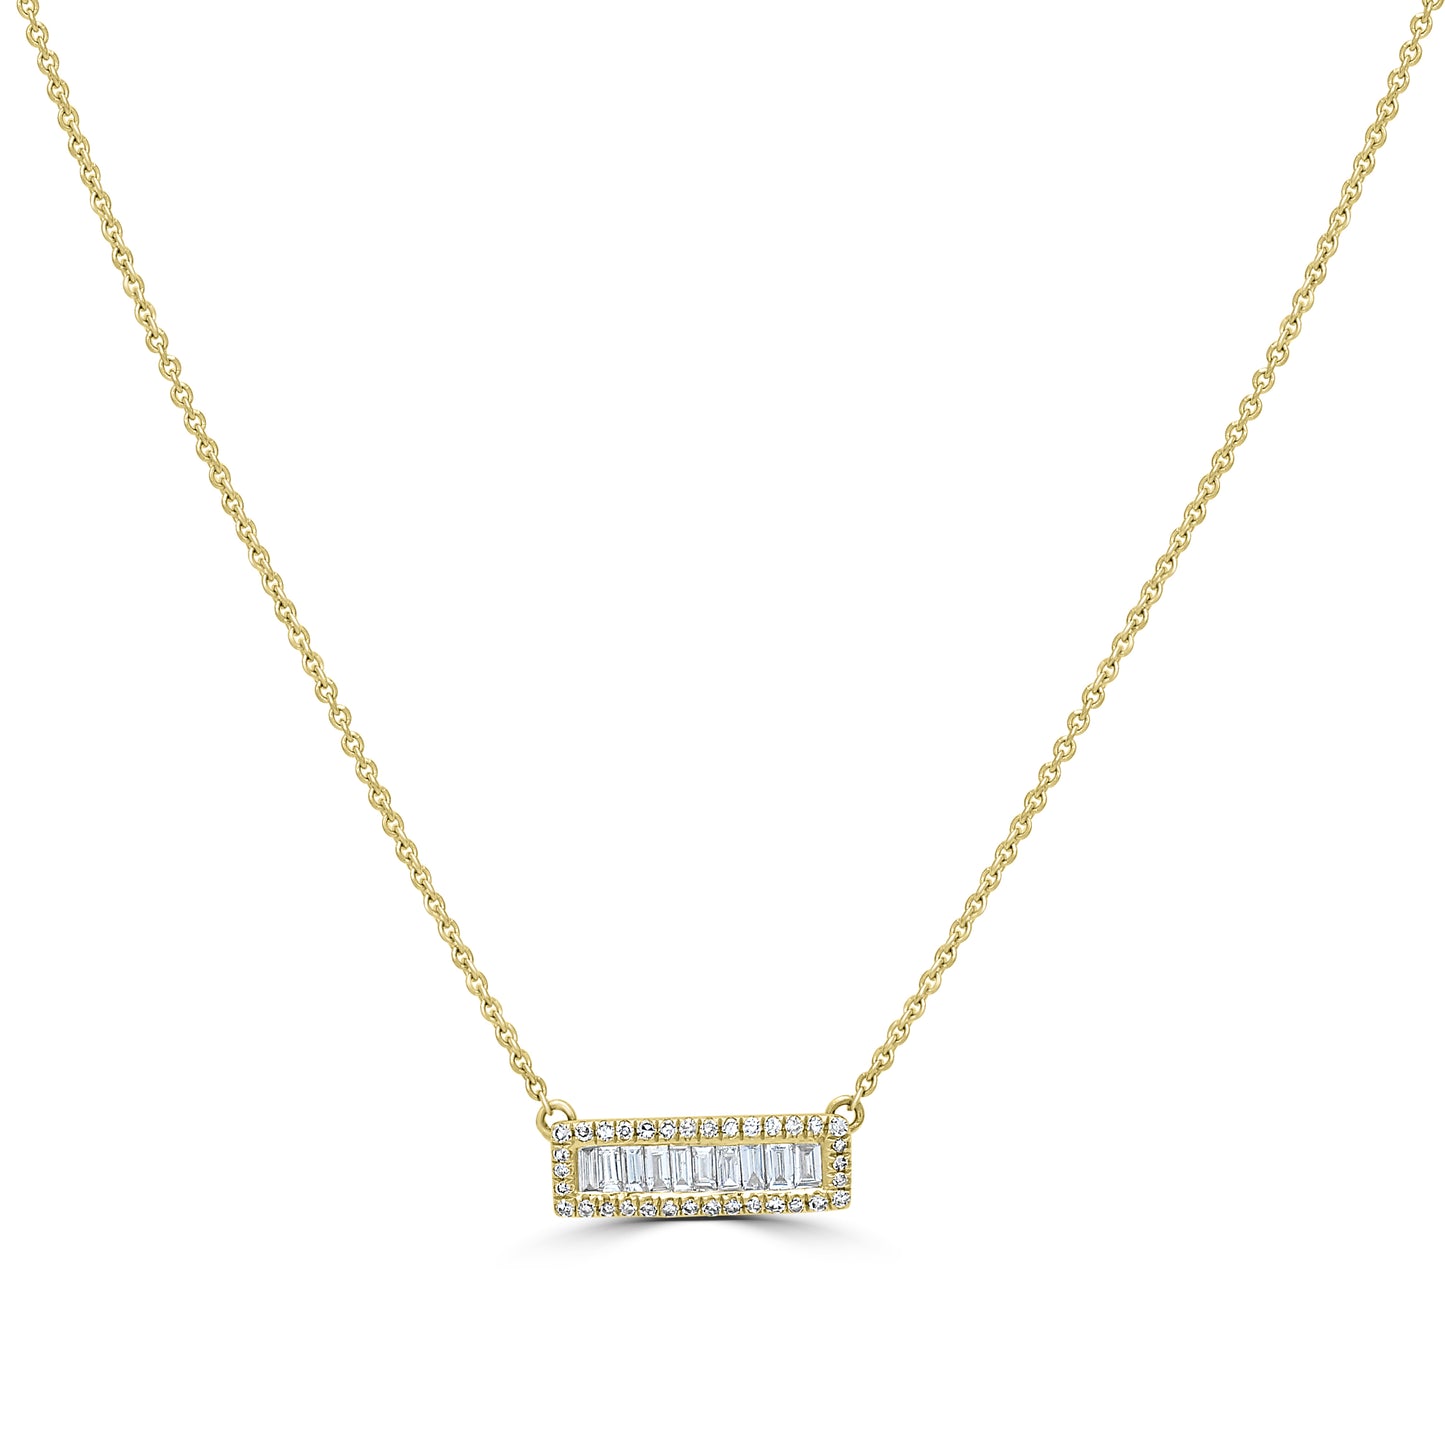 14K Gold and Diamond Bar Necklace